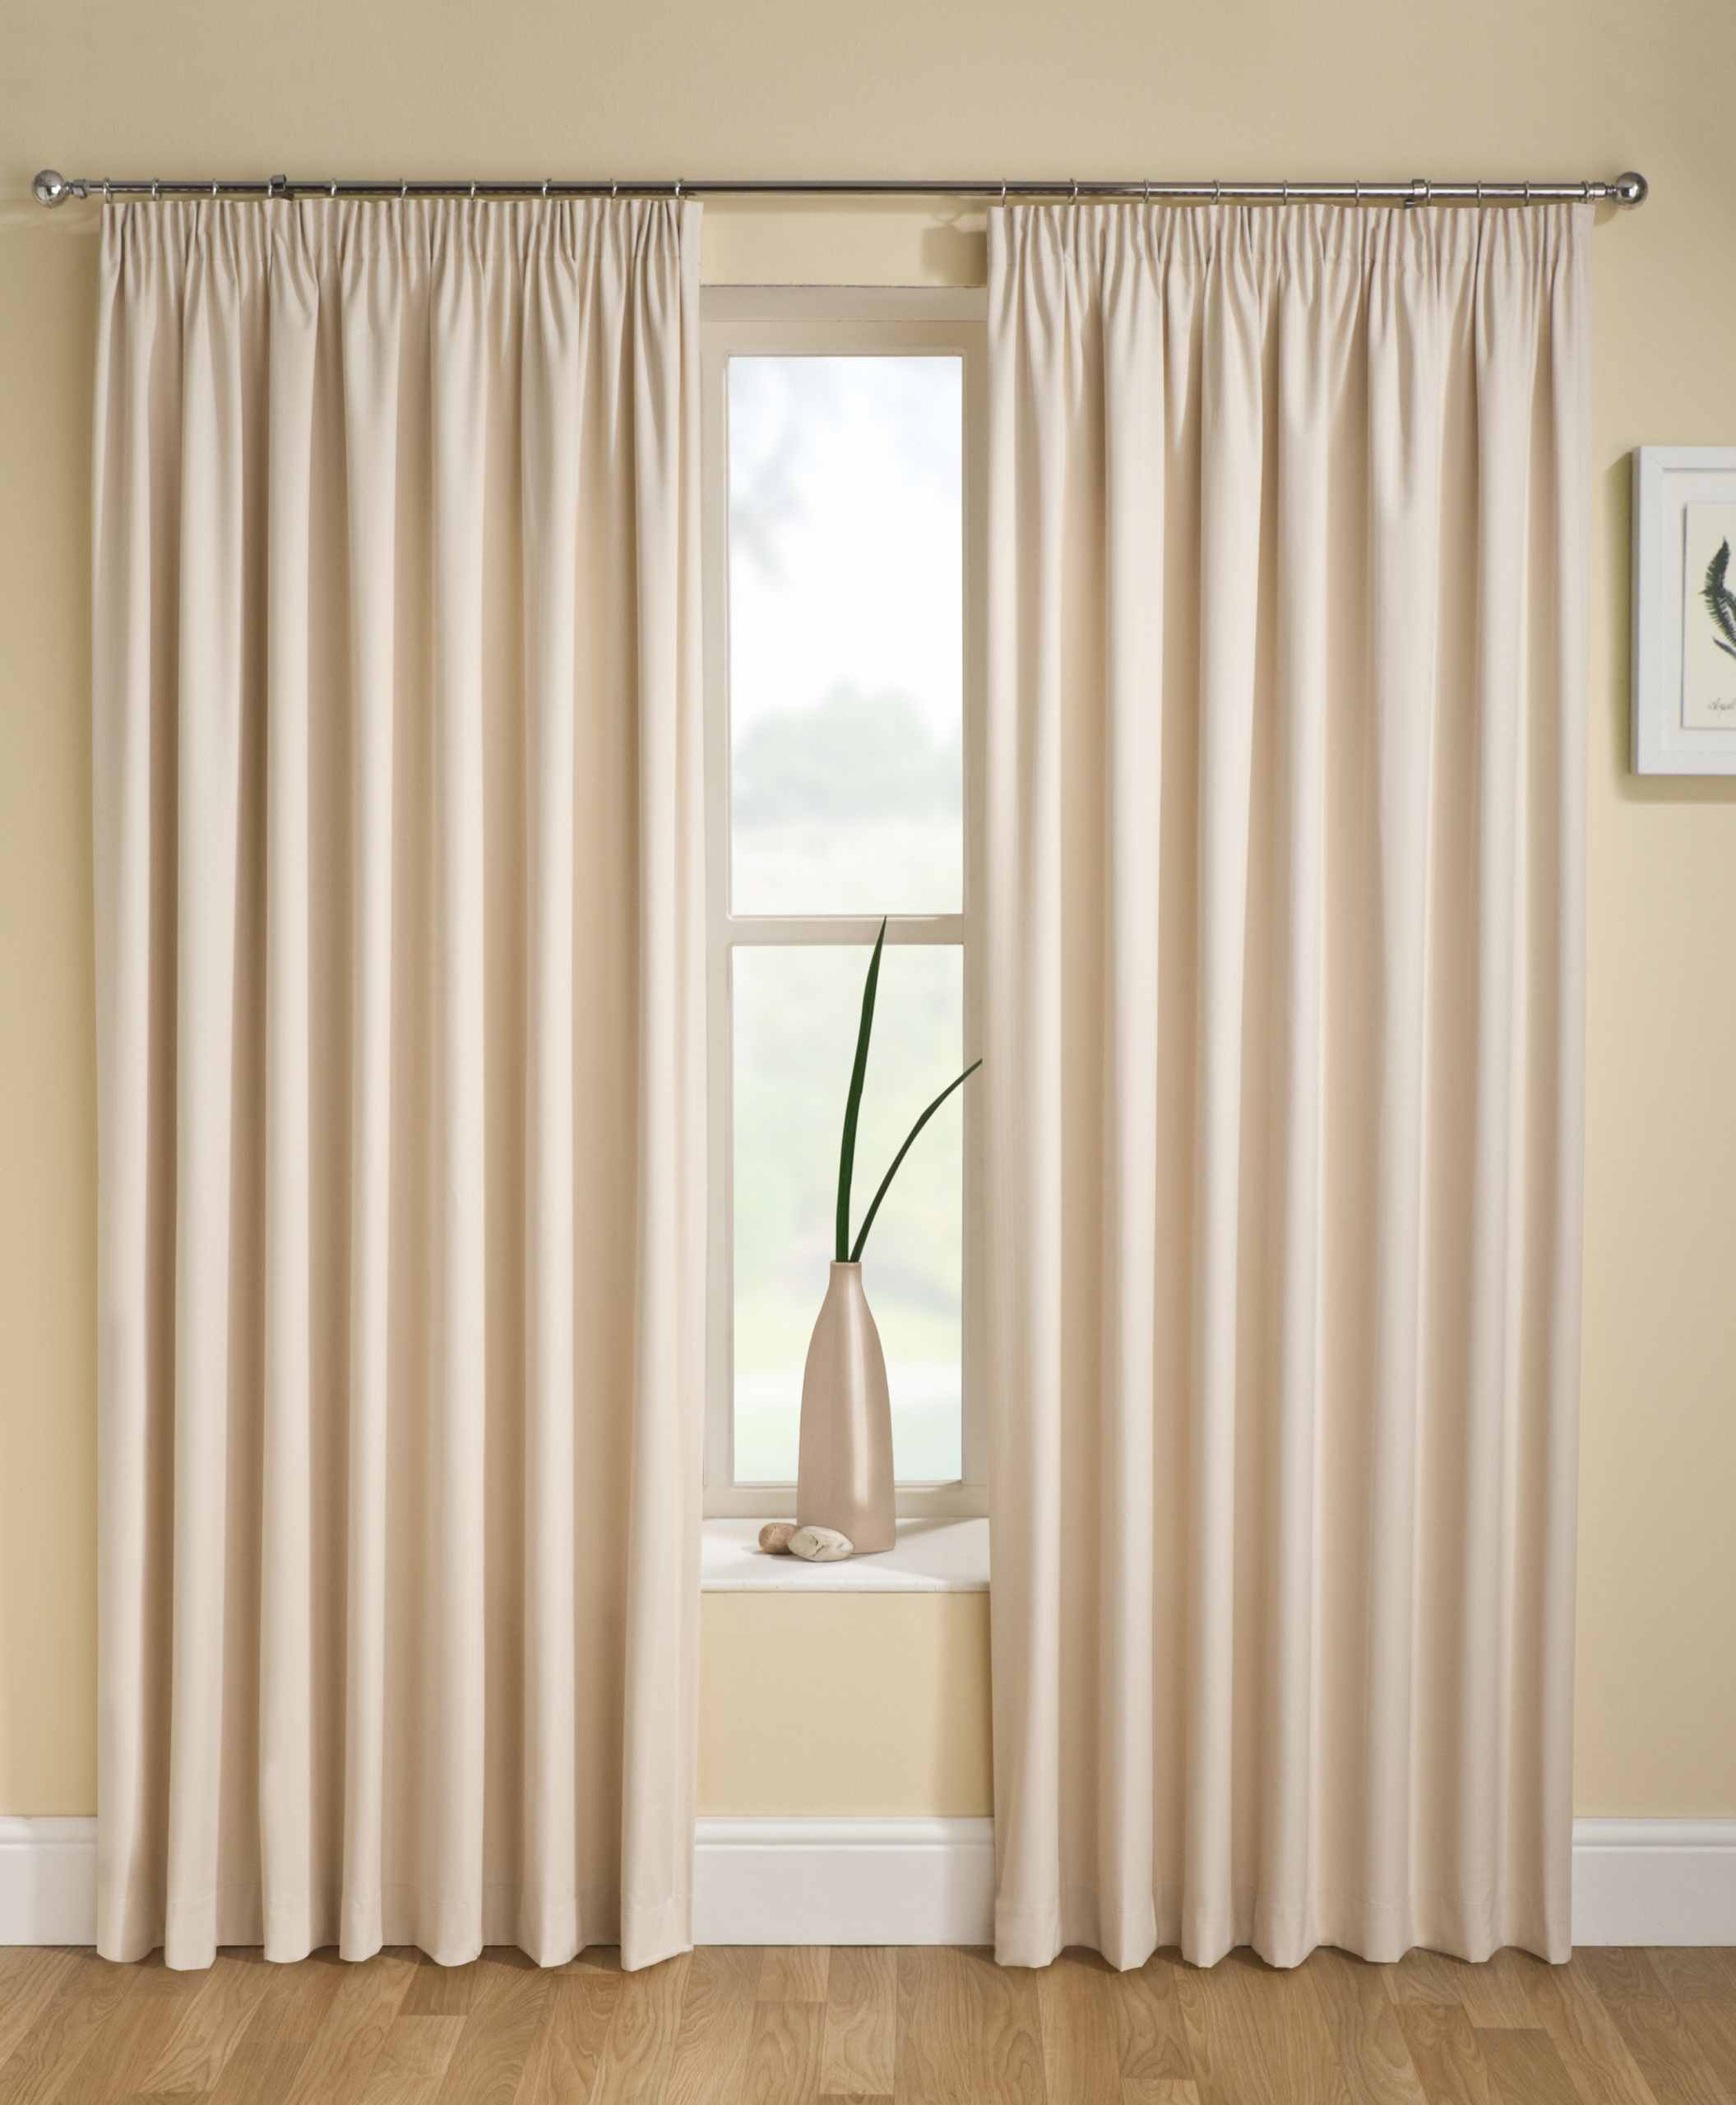 Tranquility Heavy Curtains